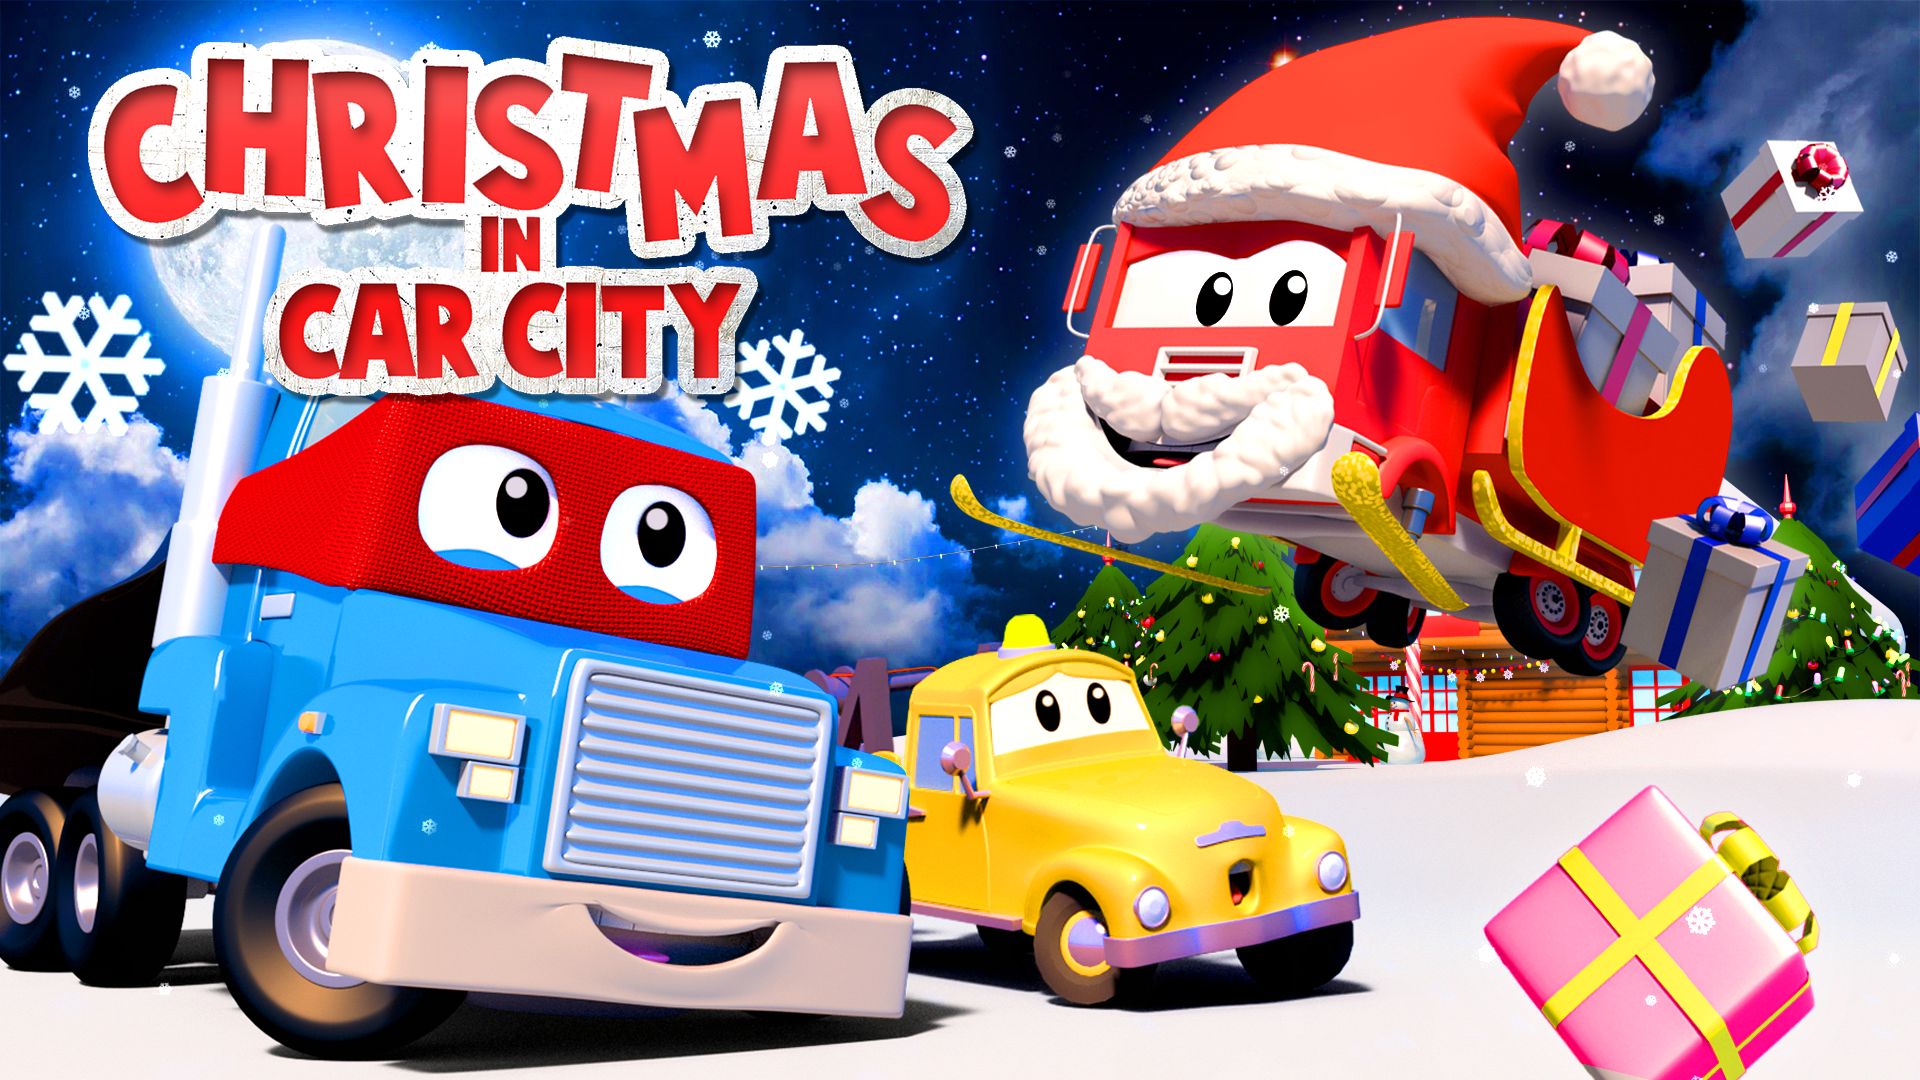 Christmas in Car City Backdrop